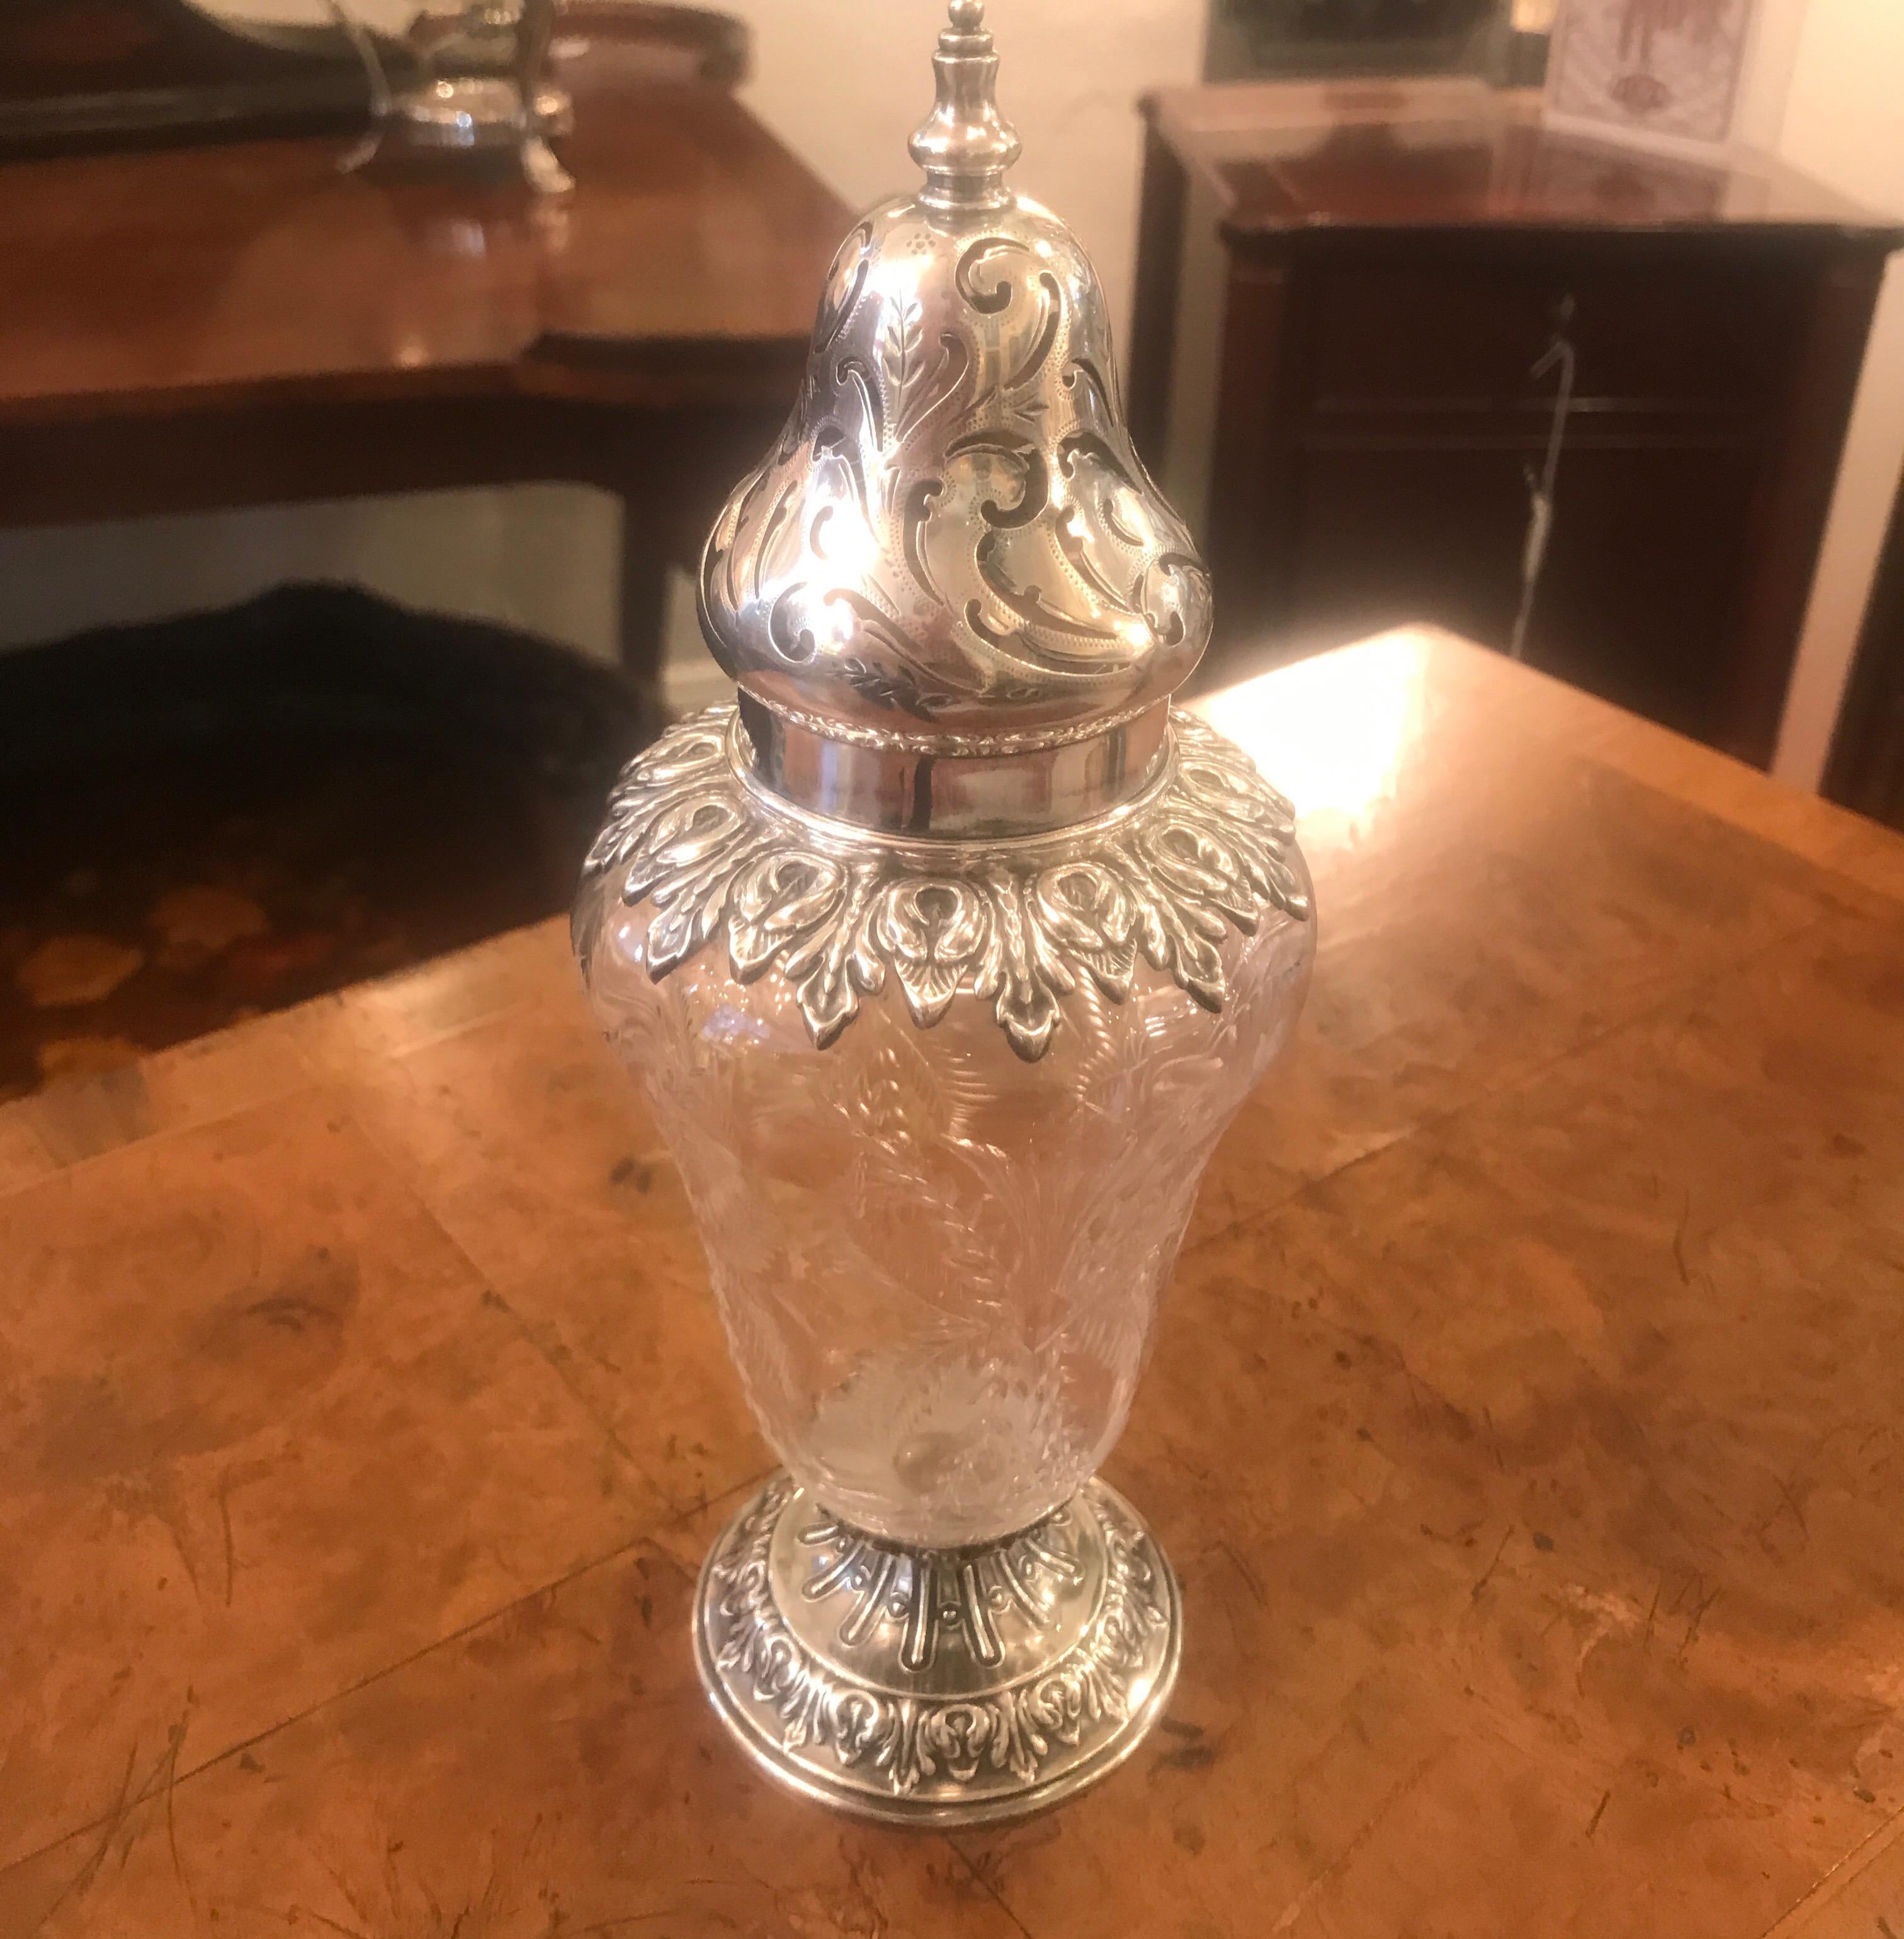 A sterling silver and intaglio cut class muffineer sugar shaker, 8.5 inches tall. The glass is cut with sprays of floral and foliat garlads and mounted in sterling silver on the top, bottom and cap.